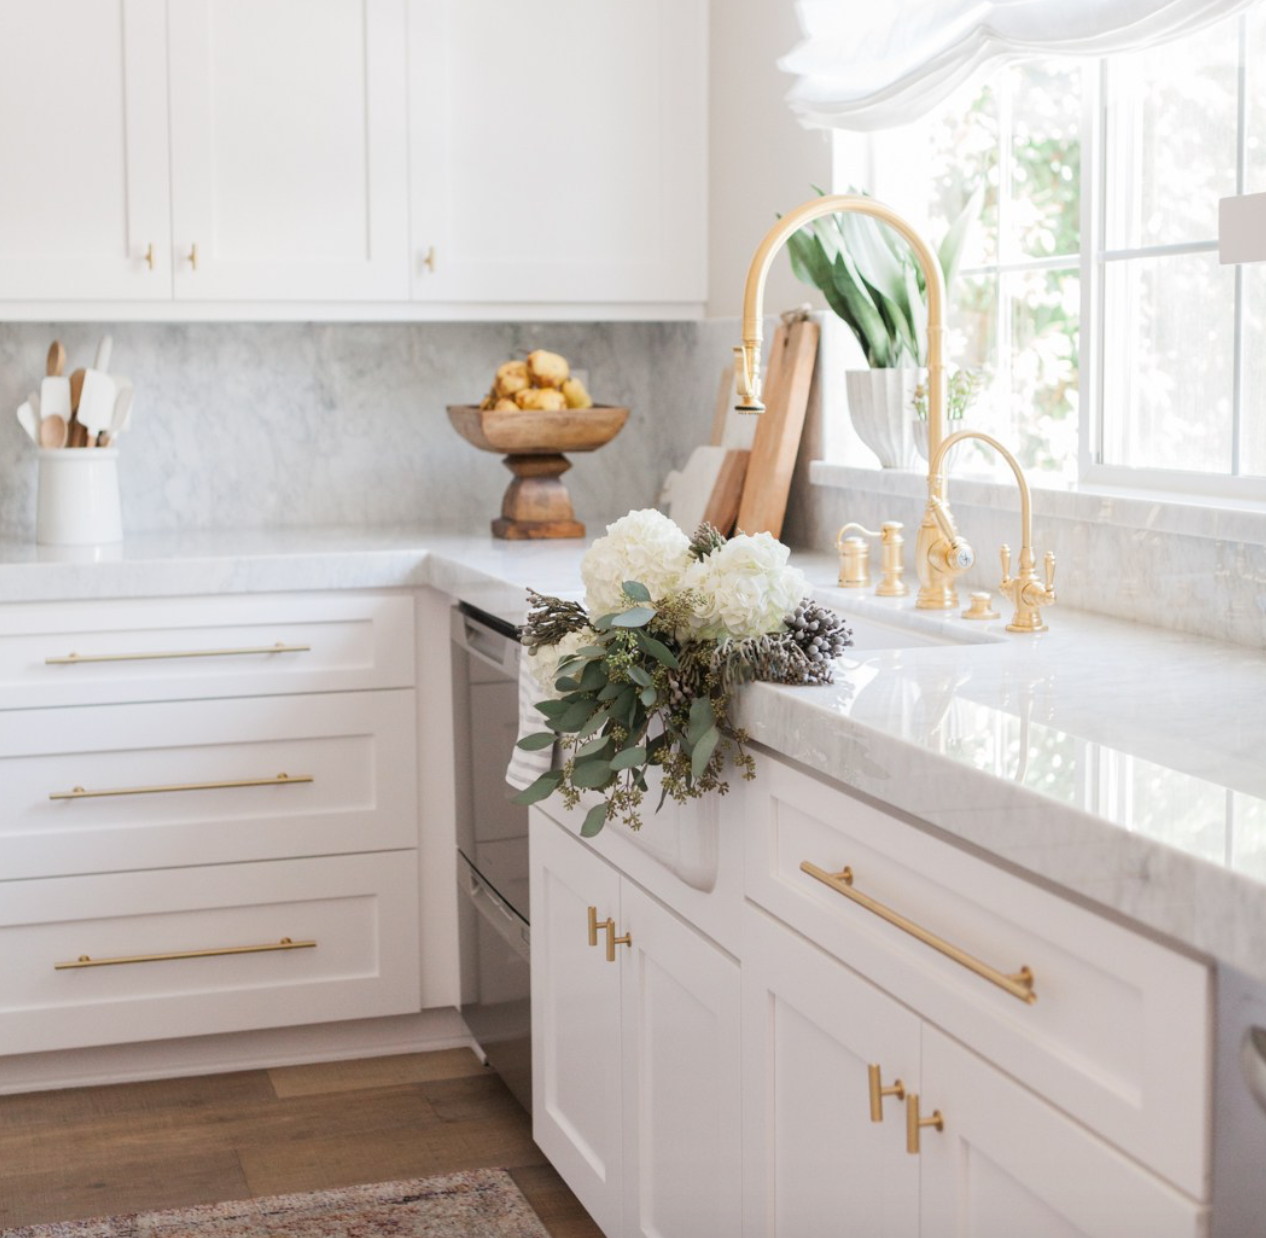 A pretty all-white kitchen with lust-worthy hardware.   From <a href="https://lemonstripes.com/decor/our-kitchen-before/" target="_blank">Lemonstripes</a> blog.